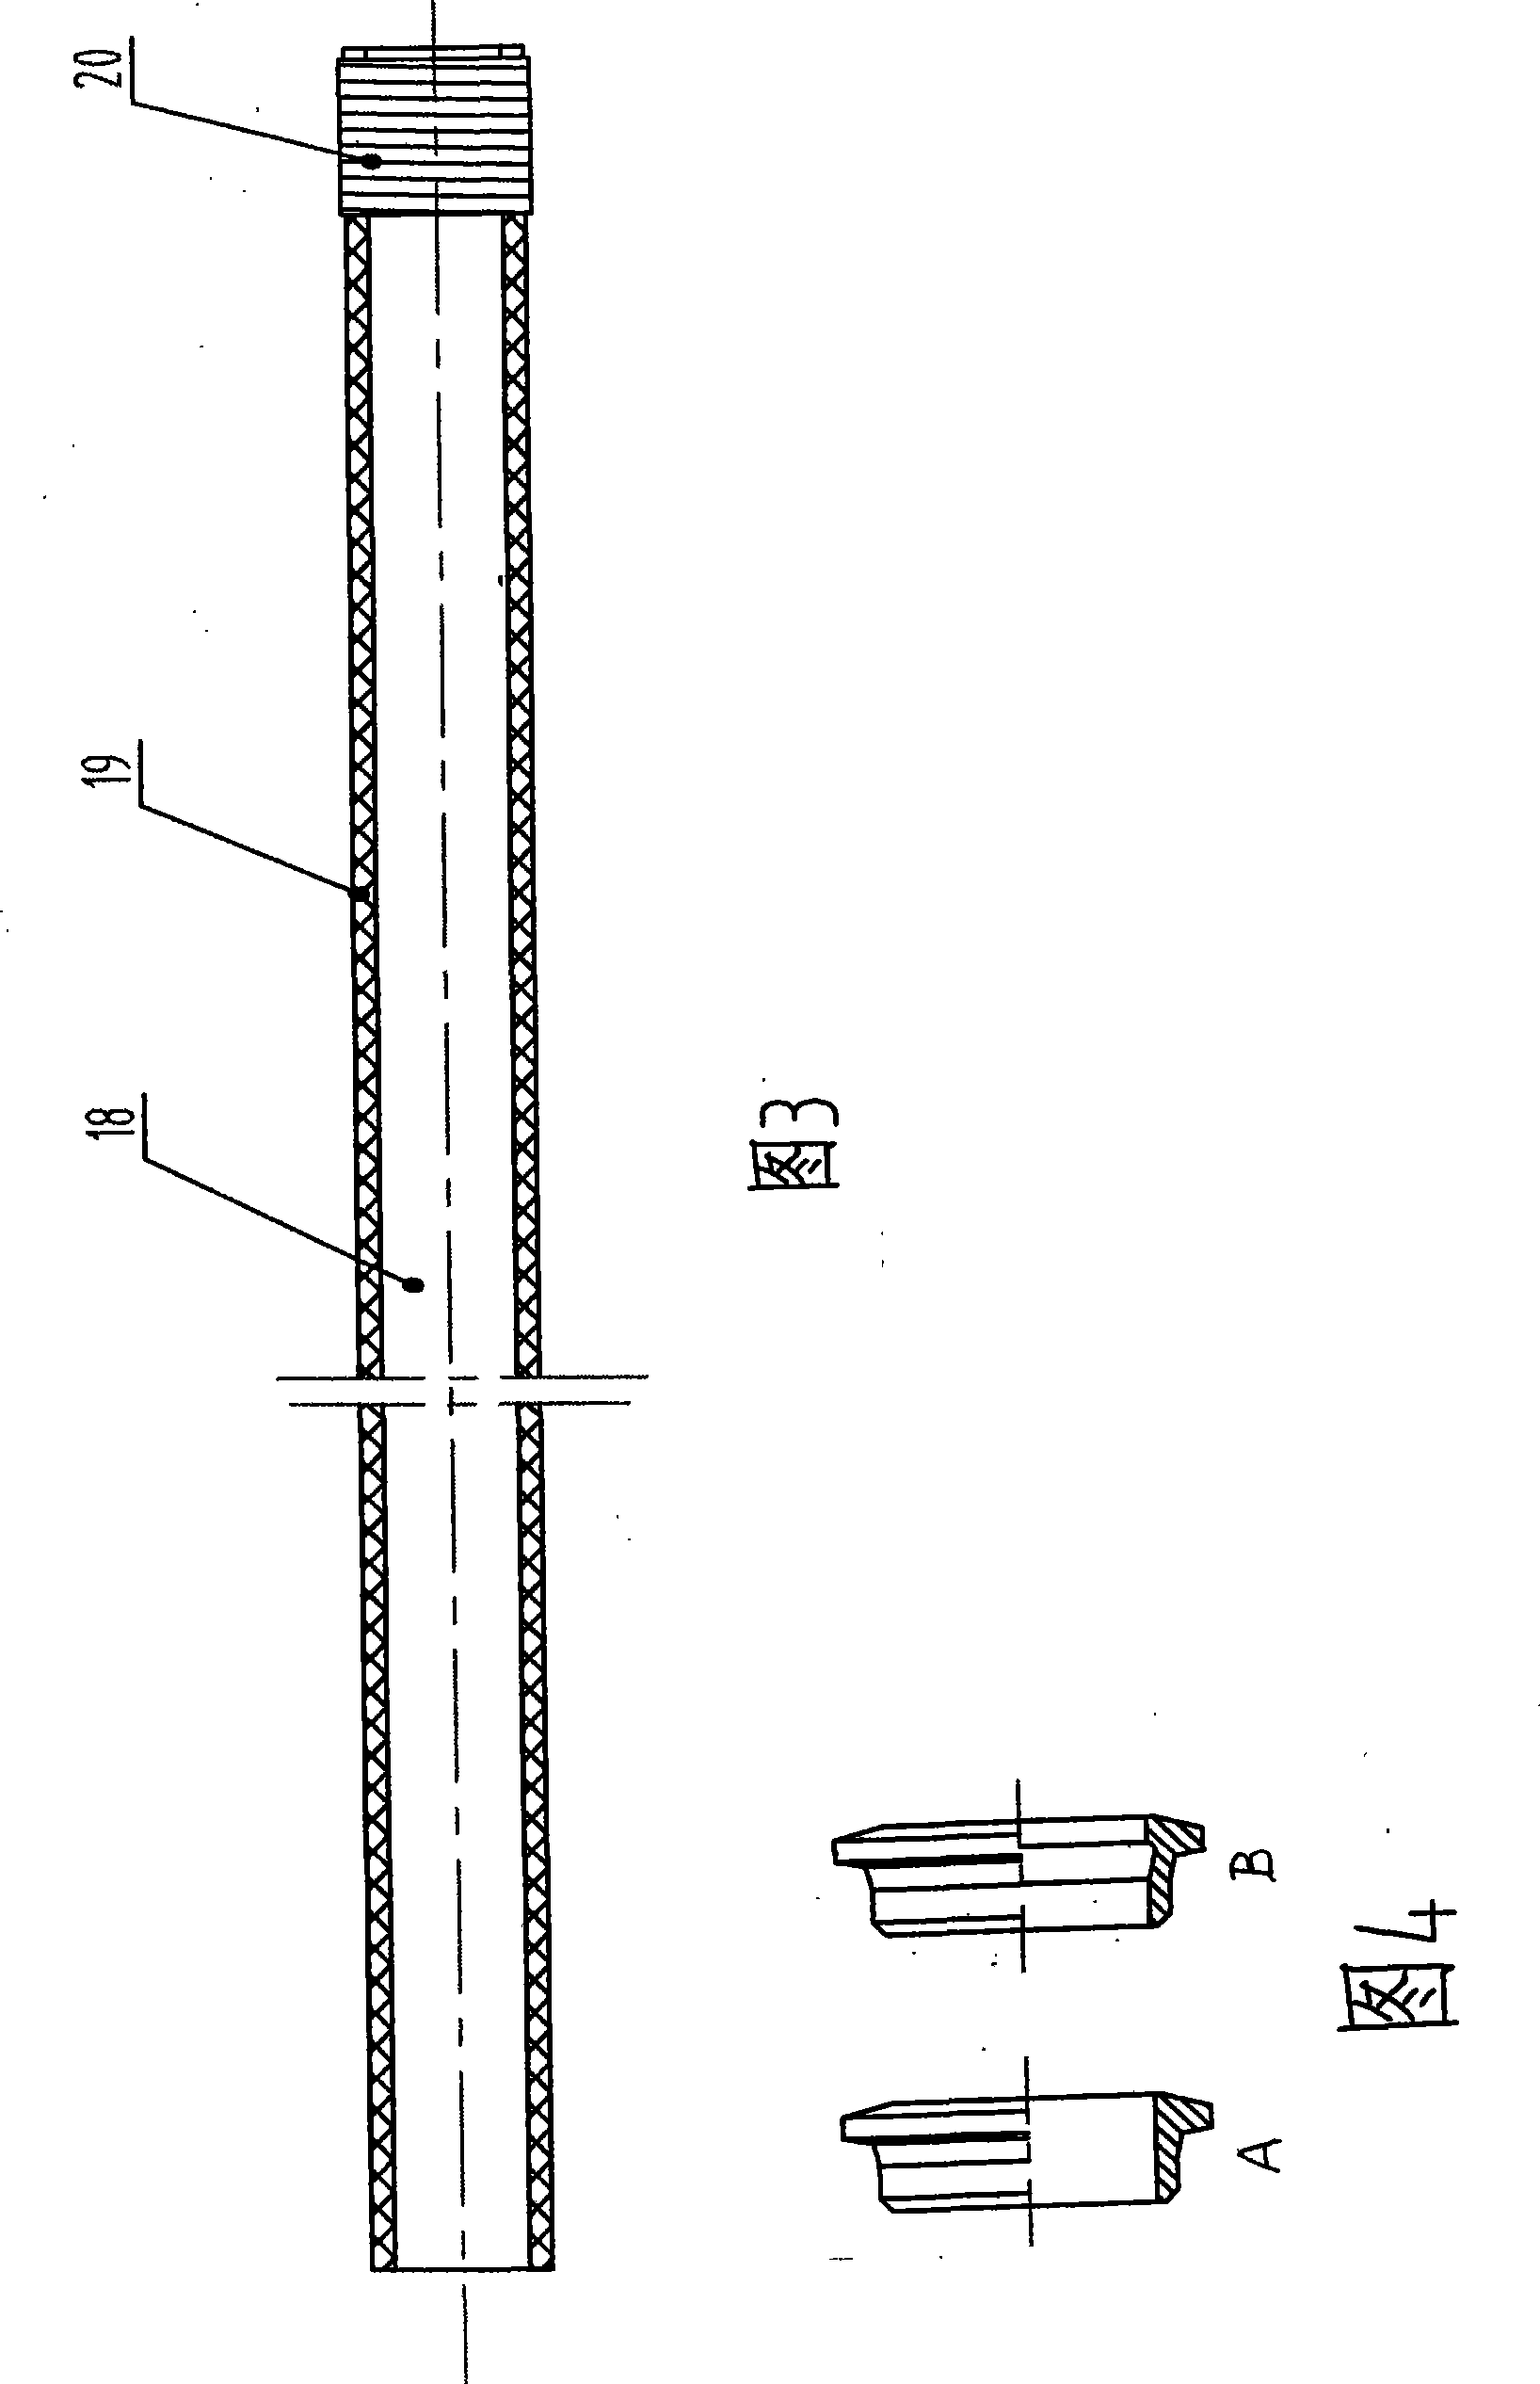 Method for polishing circular stainless-steel accurate parts on old machine tool